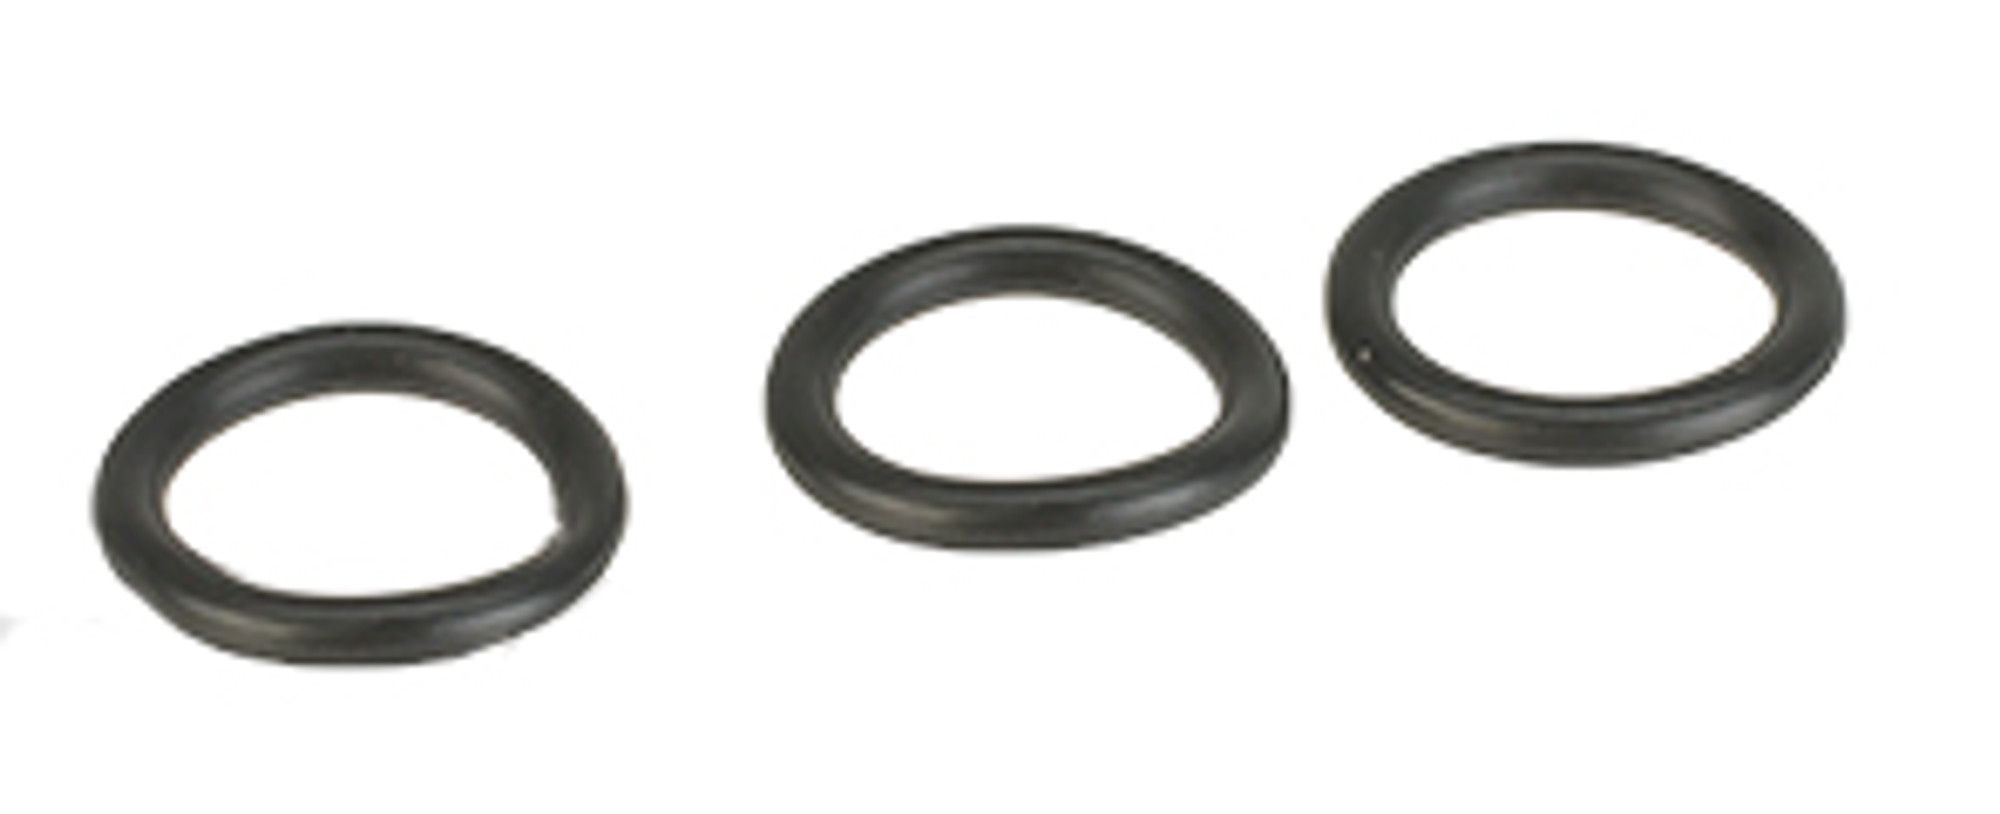 Forge Airsoft O-rings For lightweight Hi-Capa Gas Blowback Housings